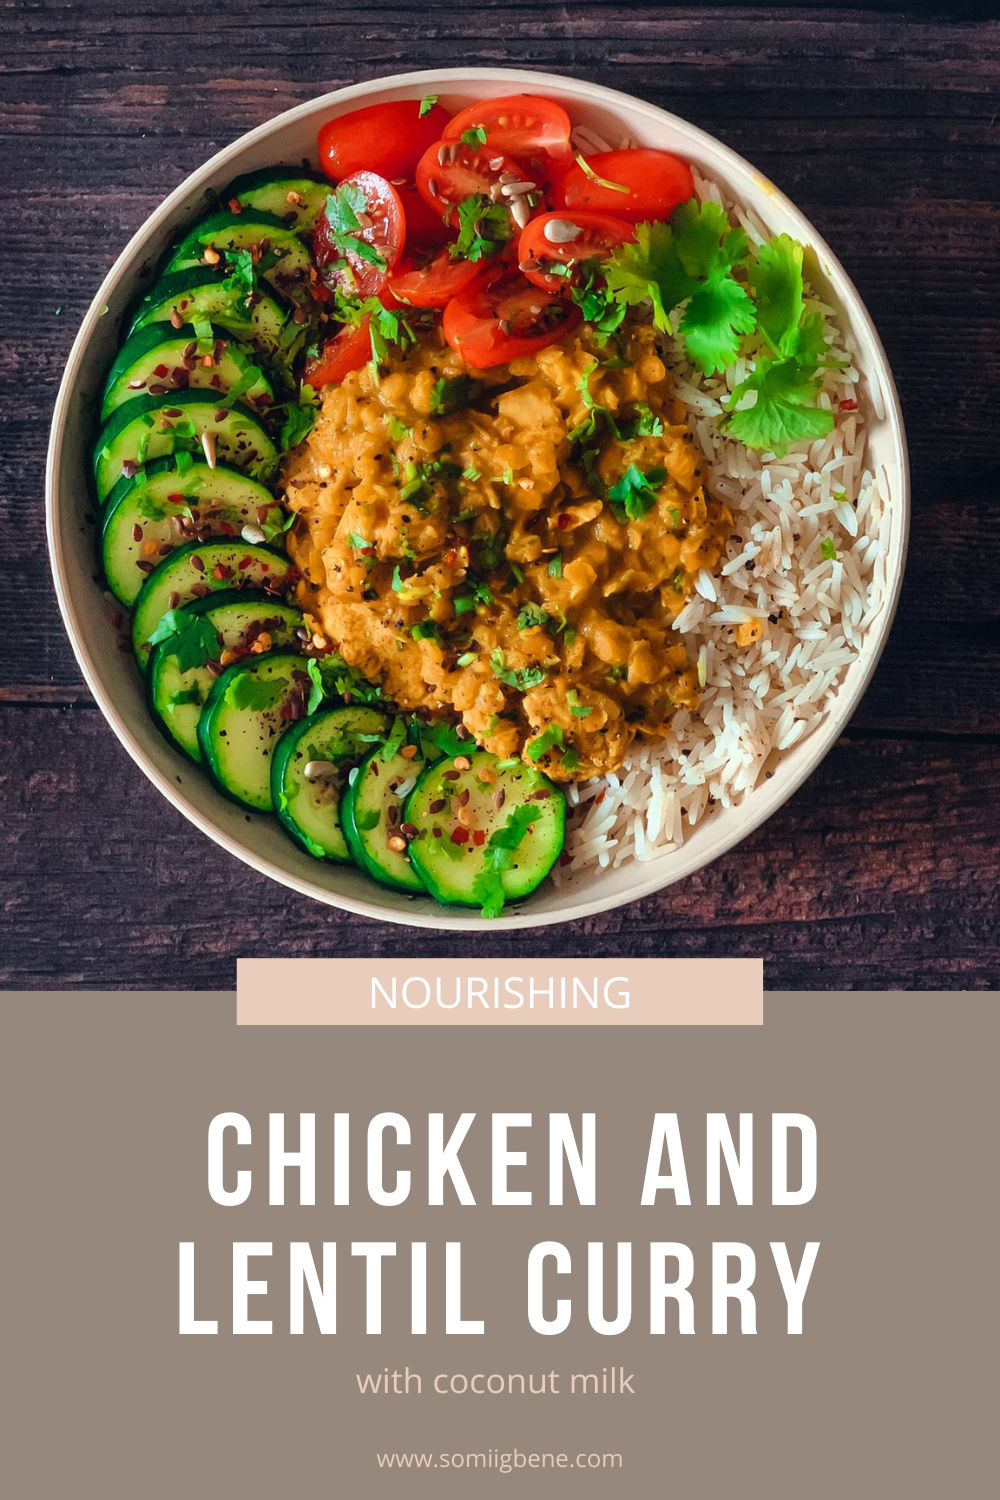 Chicken and lentil curry | Pinterest